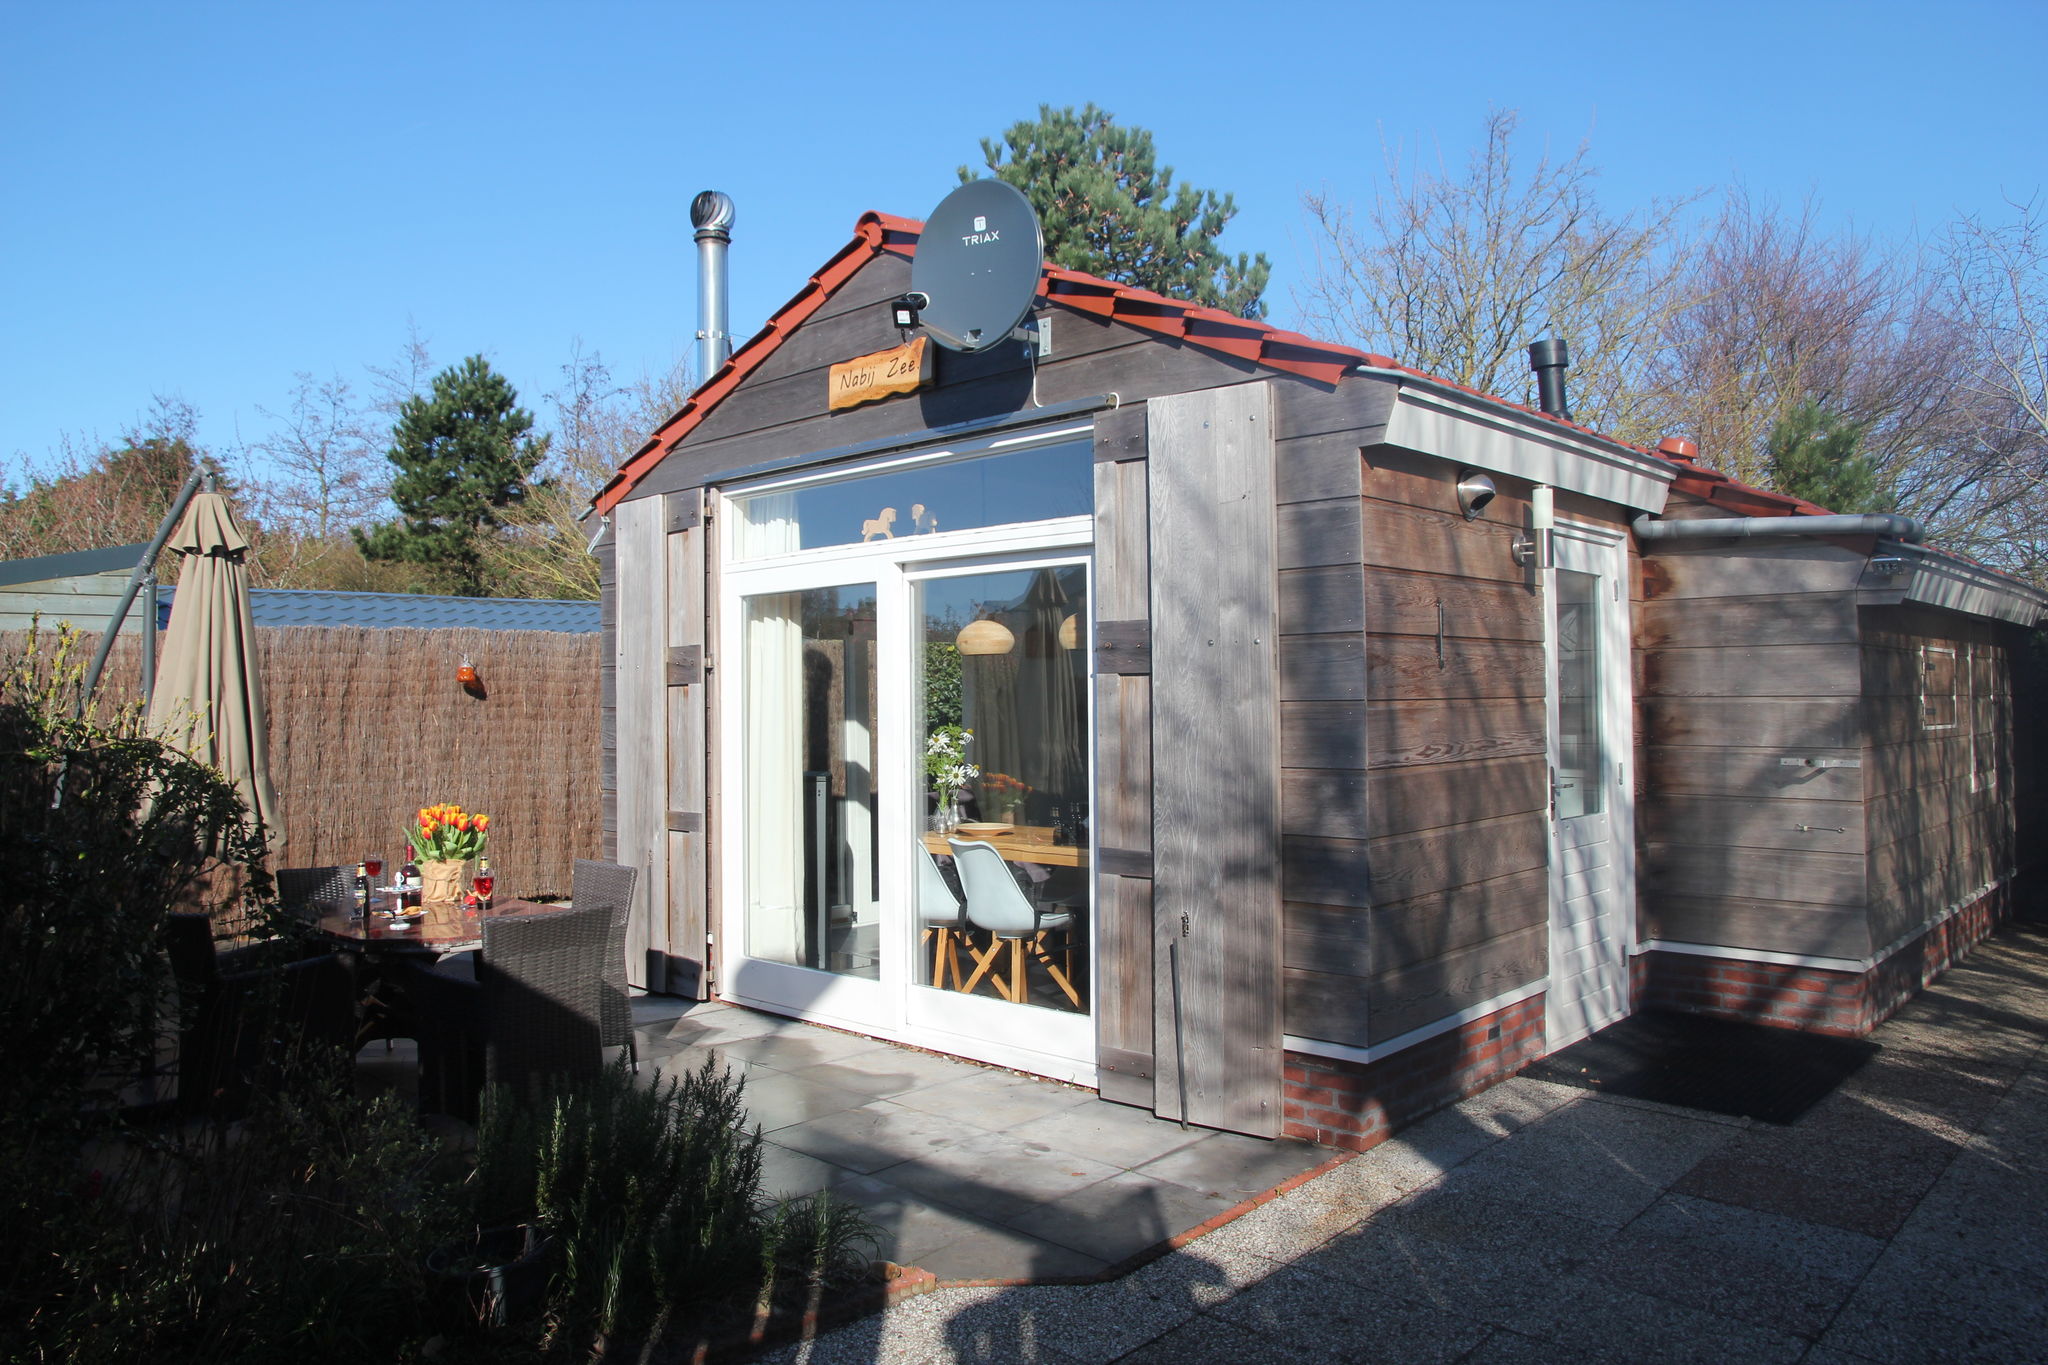 Home in Egmond aan den Hoef with Private Terrace and Garden